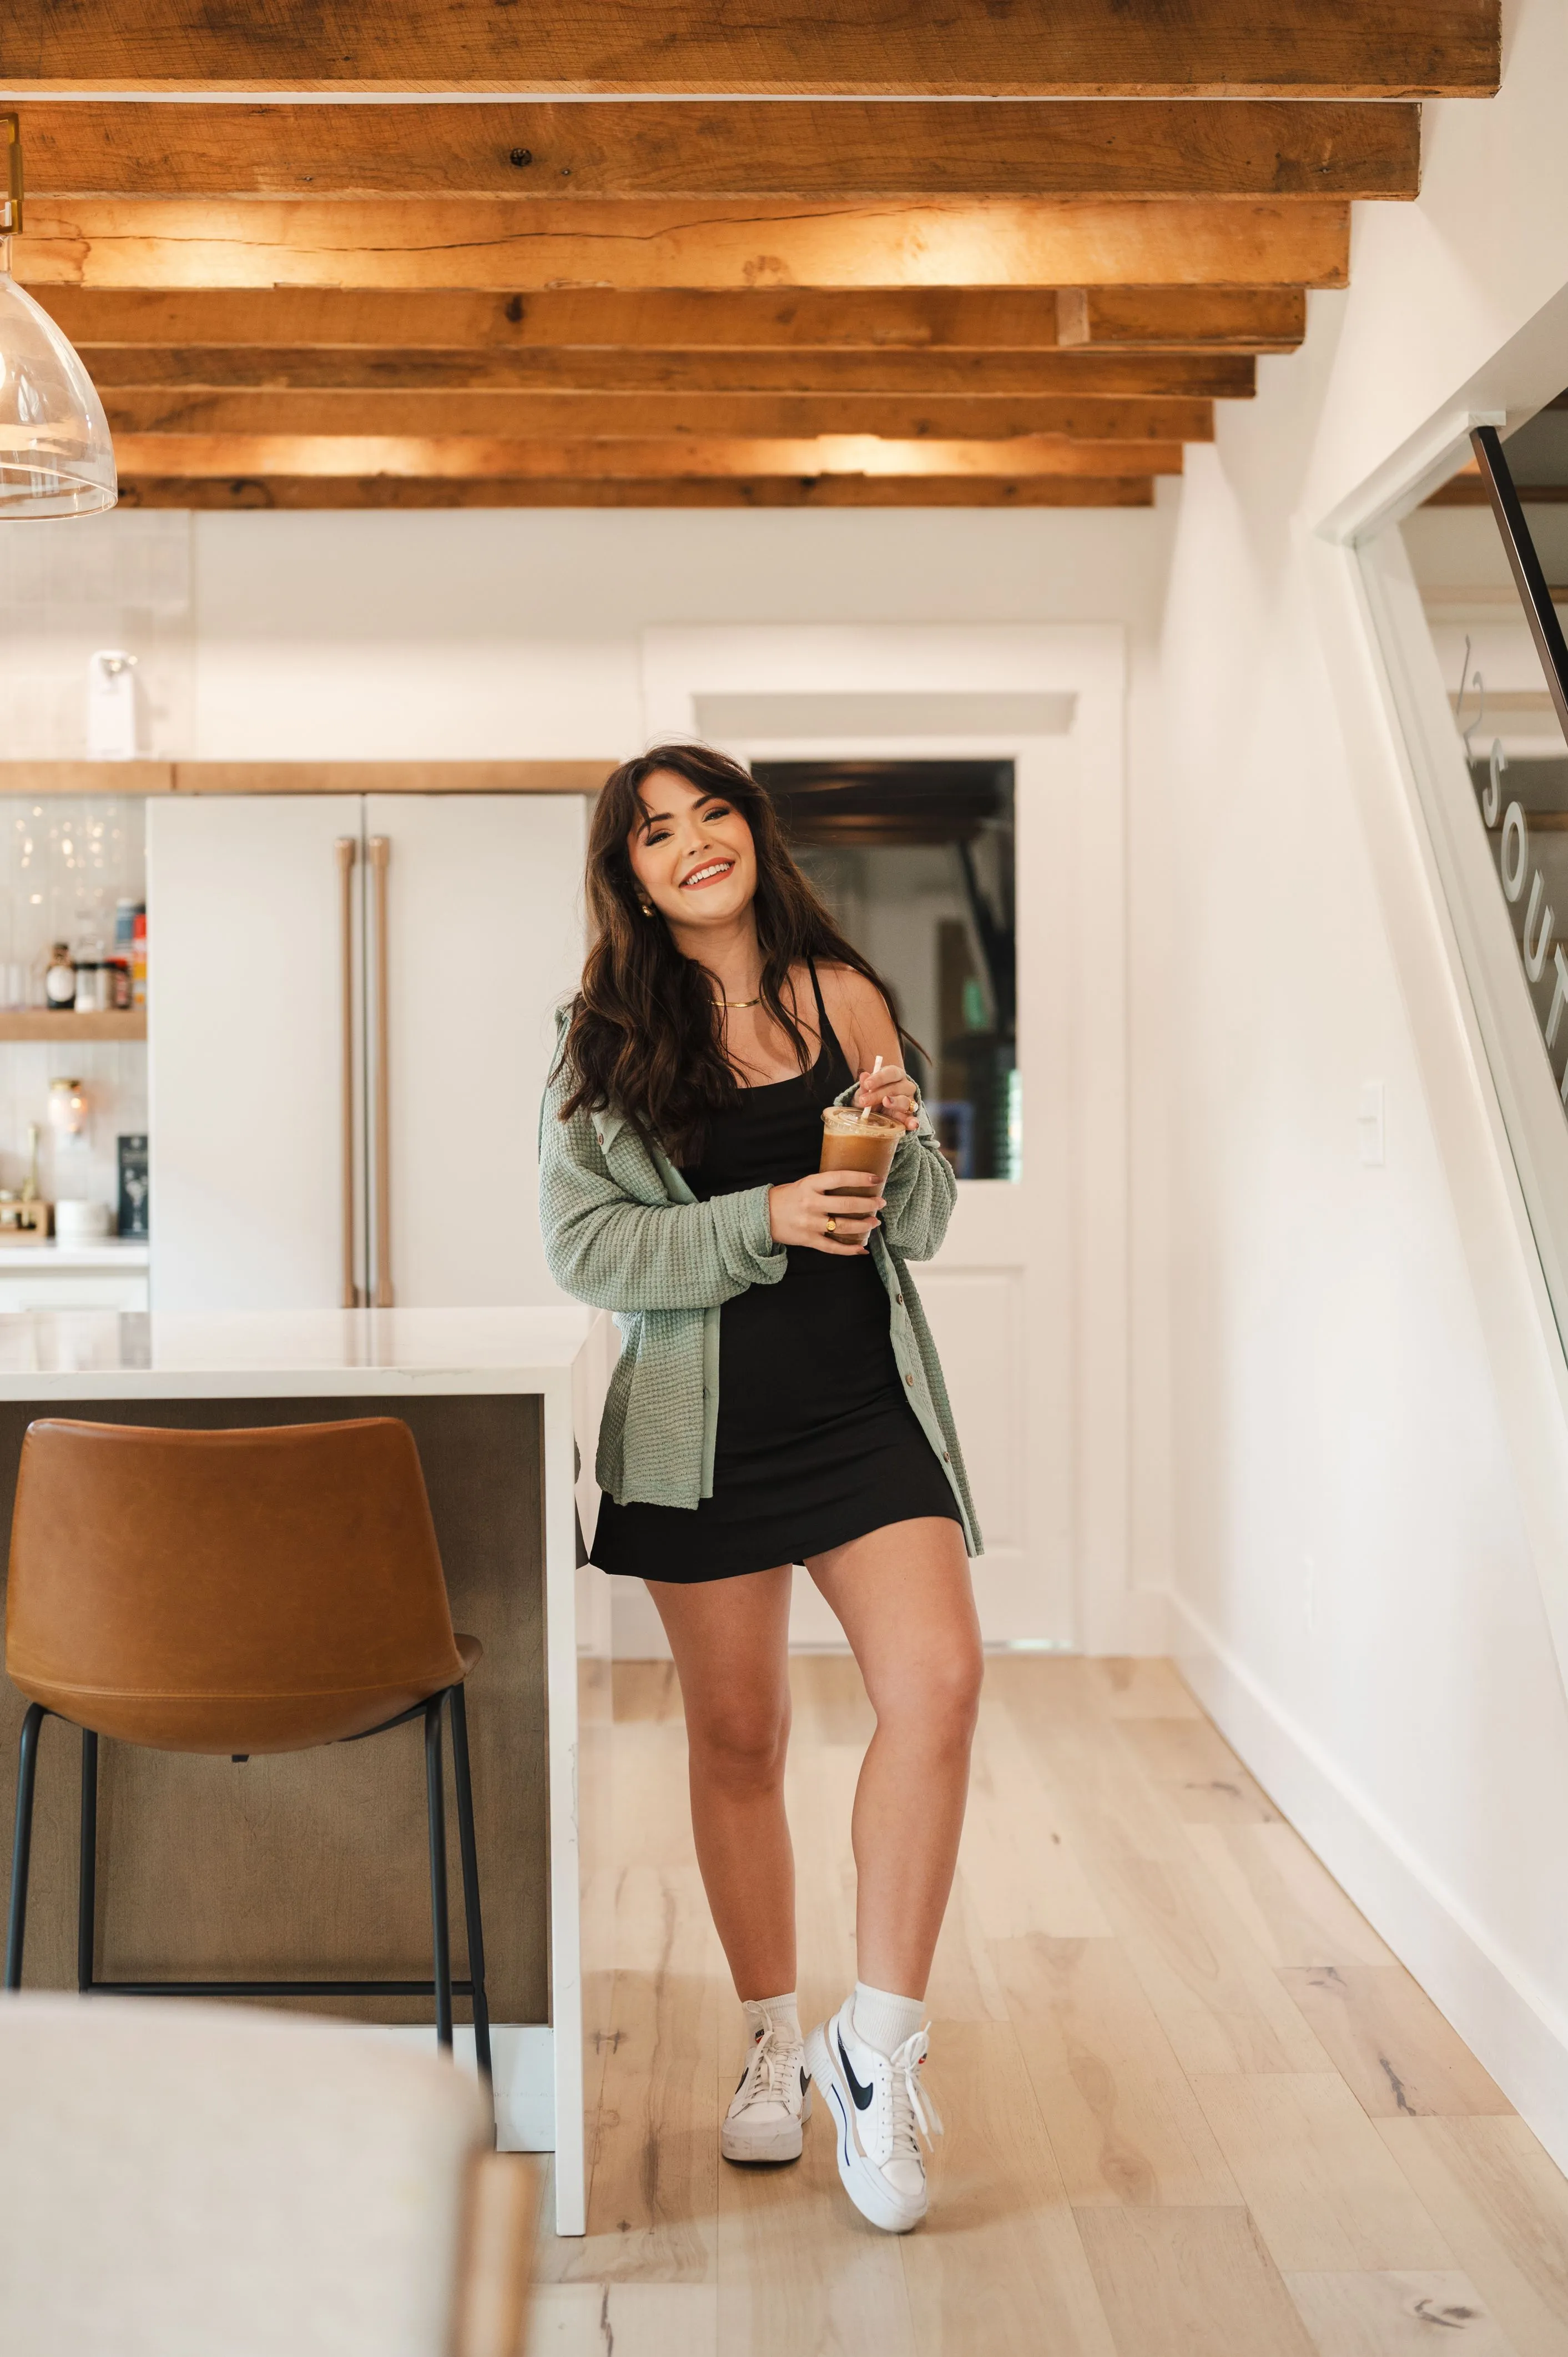 A smiling woman holding a coffee cup standing in a modern kitchen with wooden beams on the ceiling.